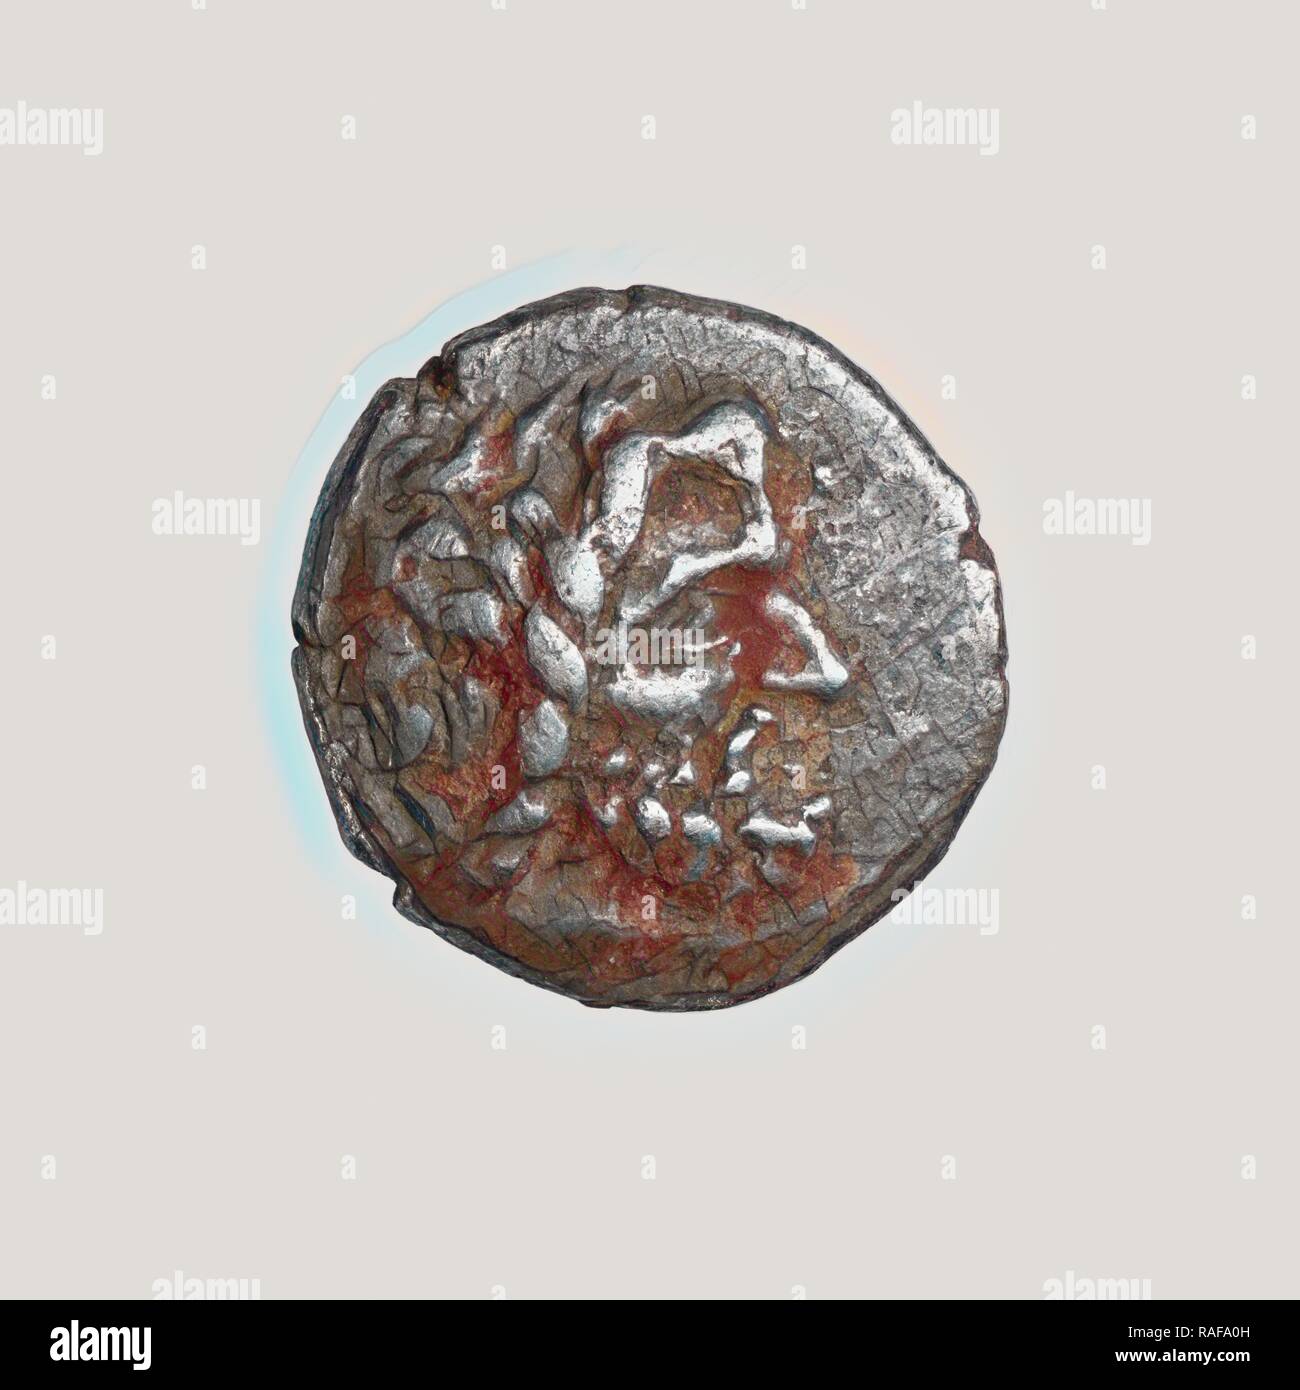 Drachm, Gortyna, Crete, 3rd century B.C, Silver, 0.0031 kg (0.0068 lb.). Reimagined by Gibon. Classic art with a reimagined Stock Photo